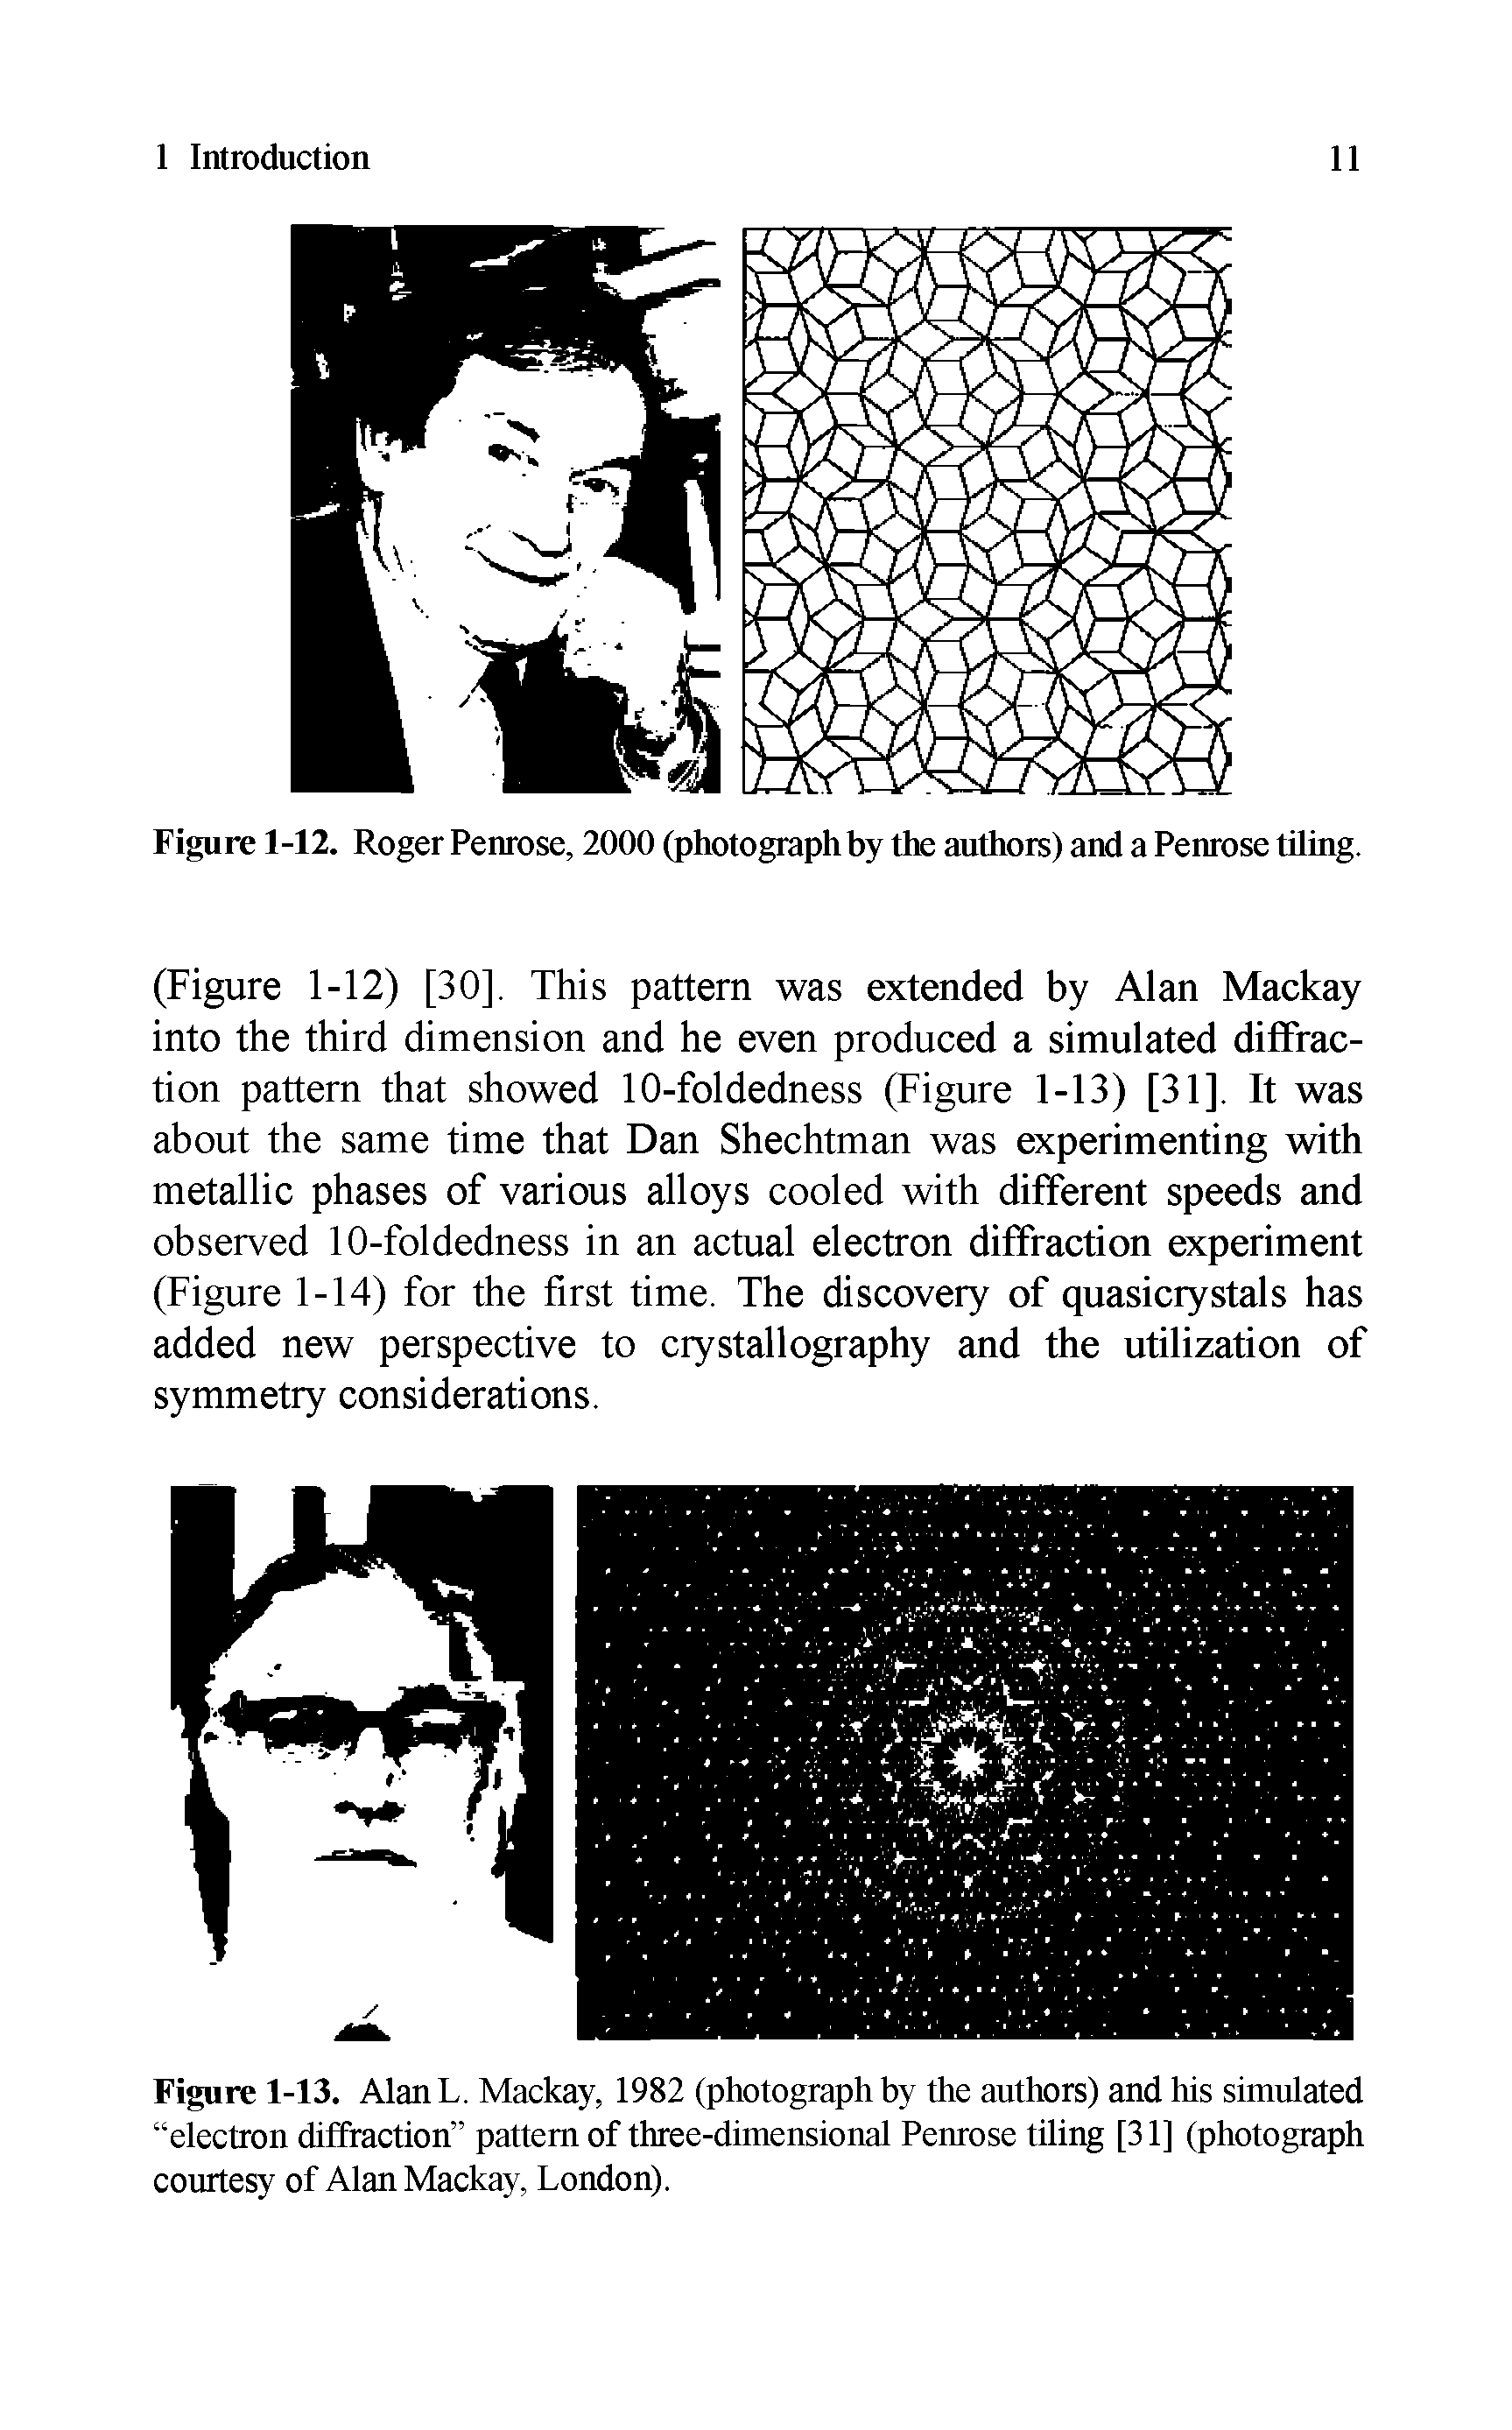 Figure 1-13. AlanL. Mackay, 1982 (photograph by the authors) and his simulated electron diffraction pattern of three-dimensional Penrose tiling [31] (photograph courtesy of Alan Mackay, London).